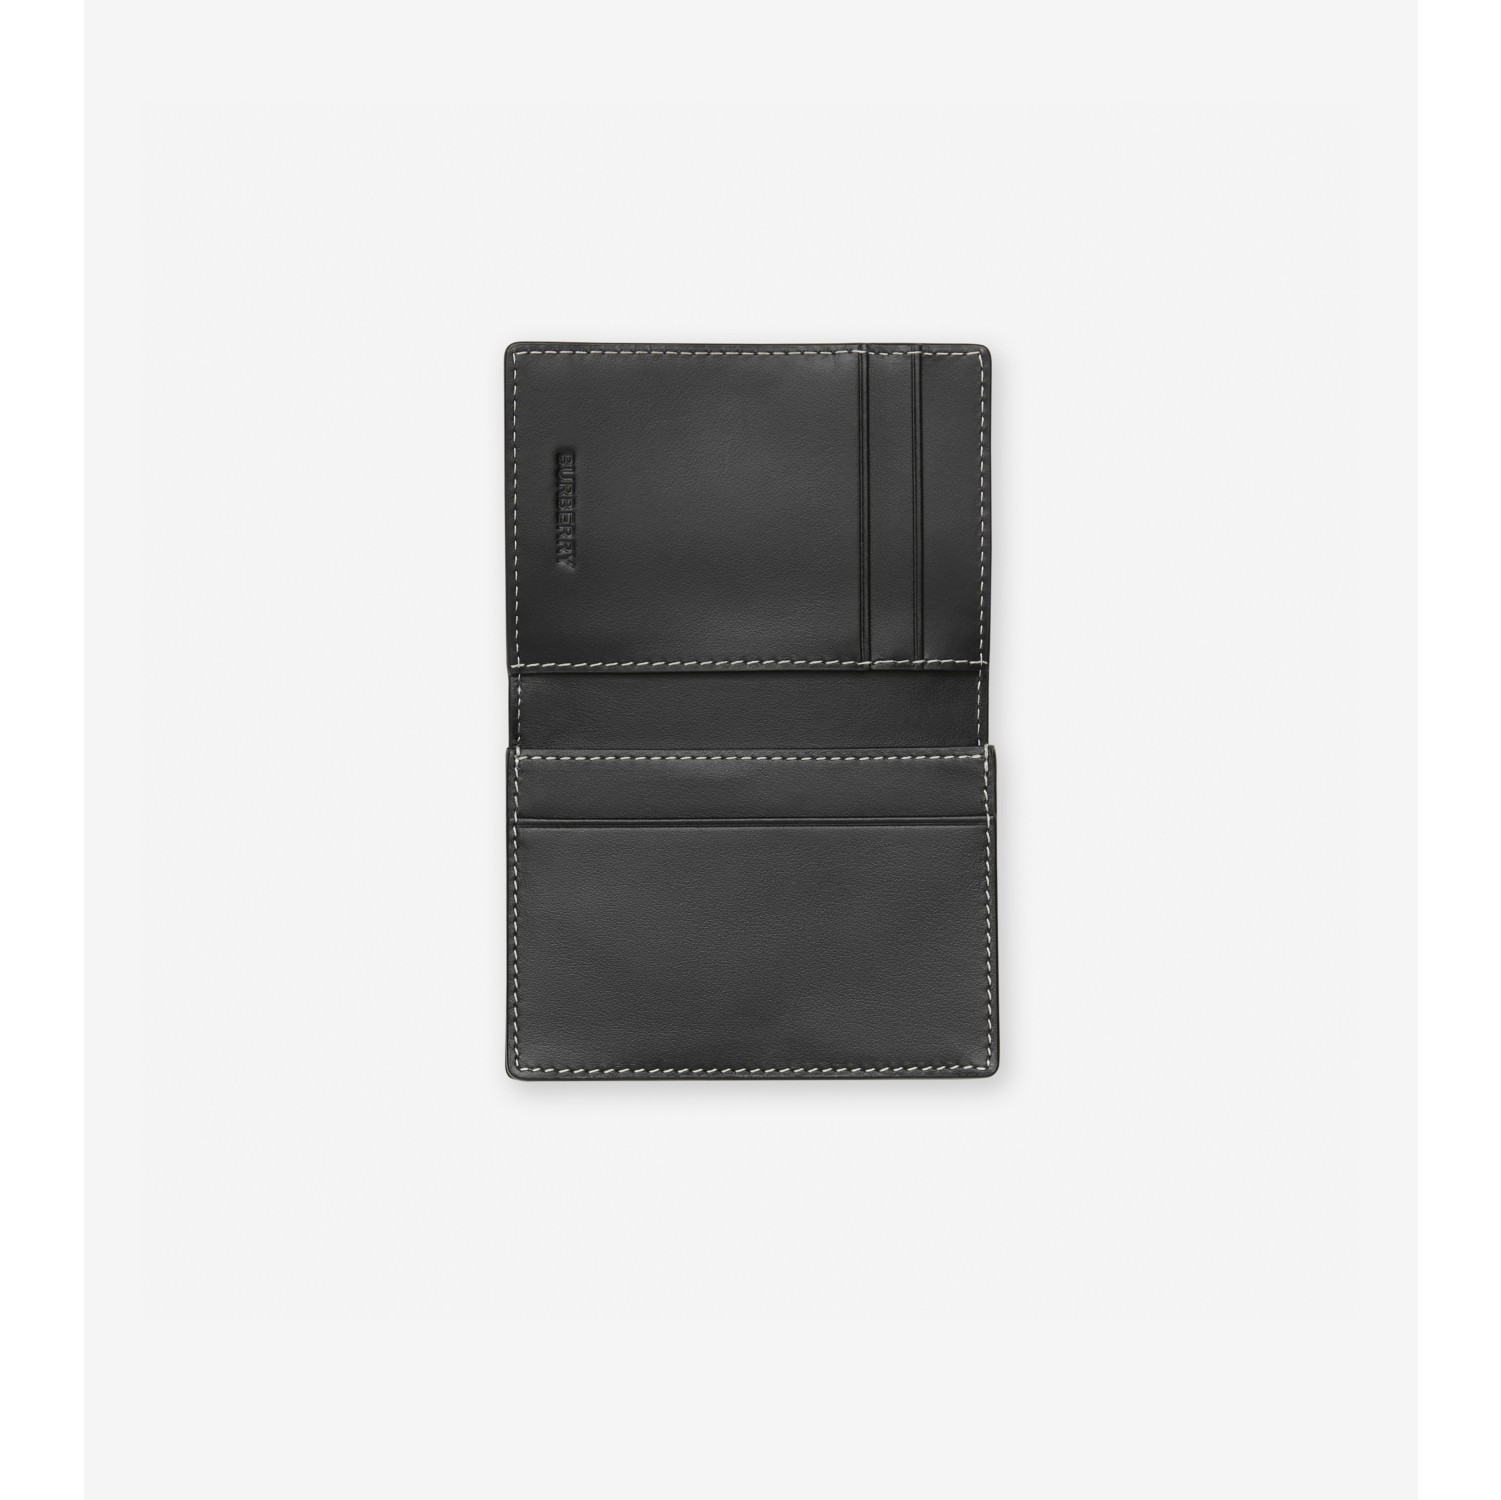 Burberry wallets & card holders for Men